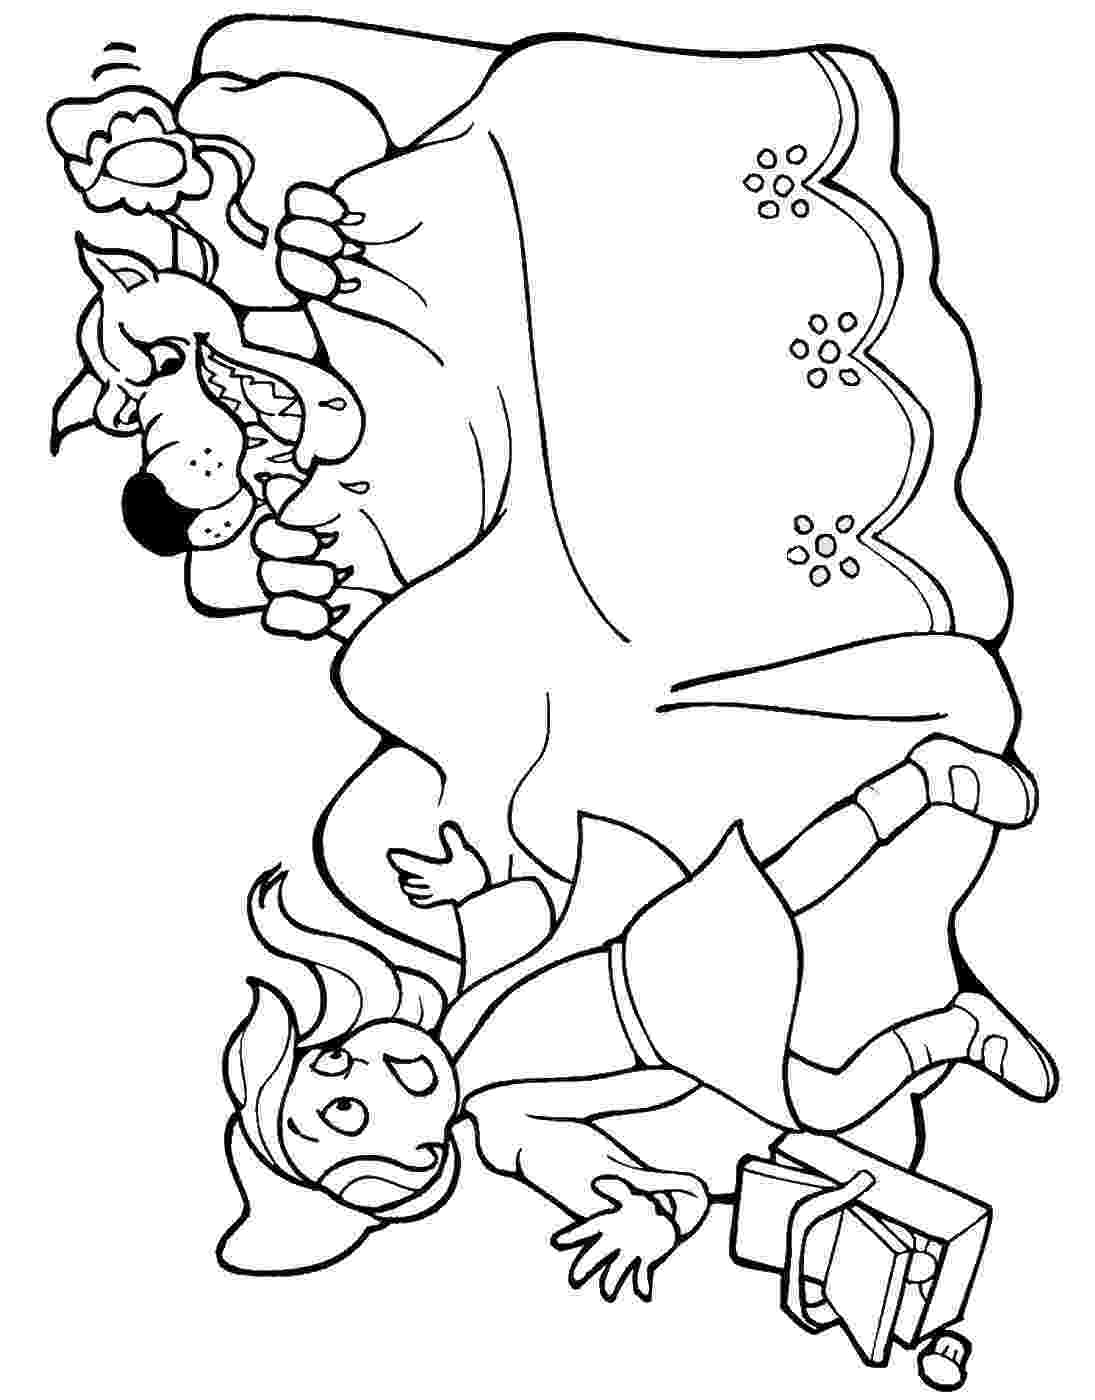 little red riding hood coloring sheet little red riding hood coloring pages birthday printable red little coloring sheet riding hood 